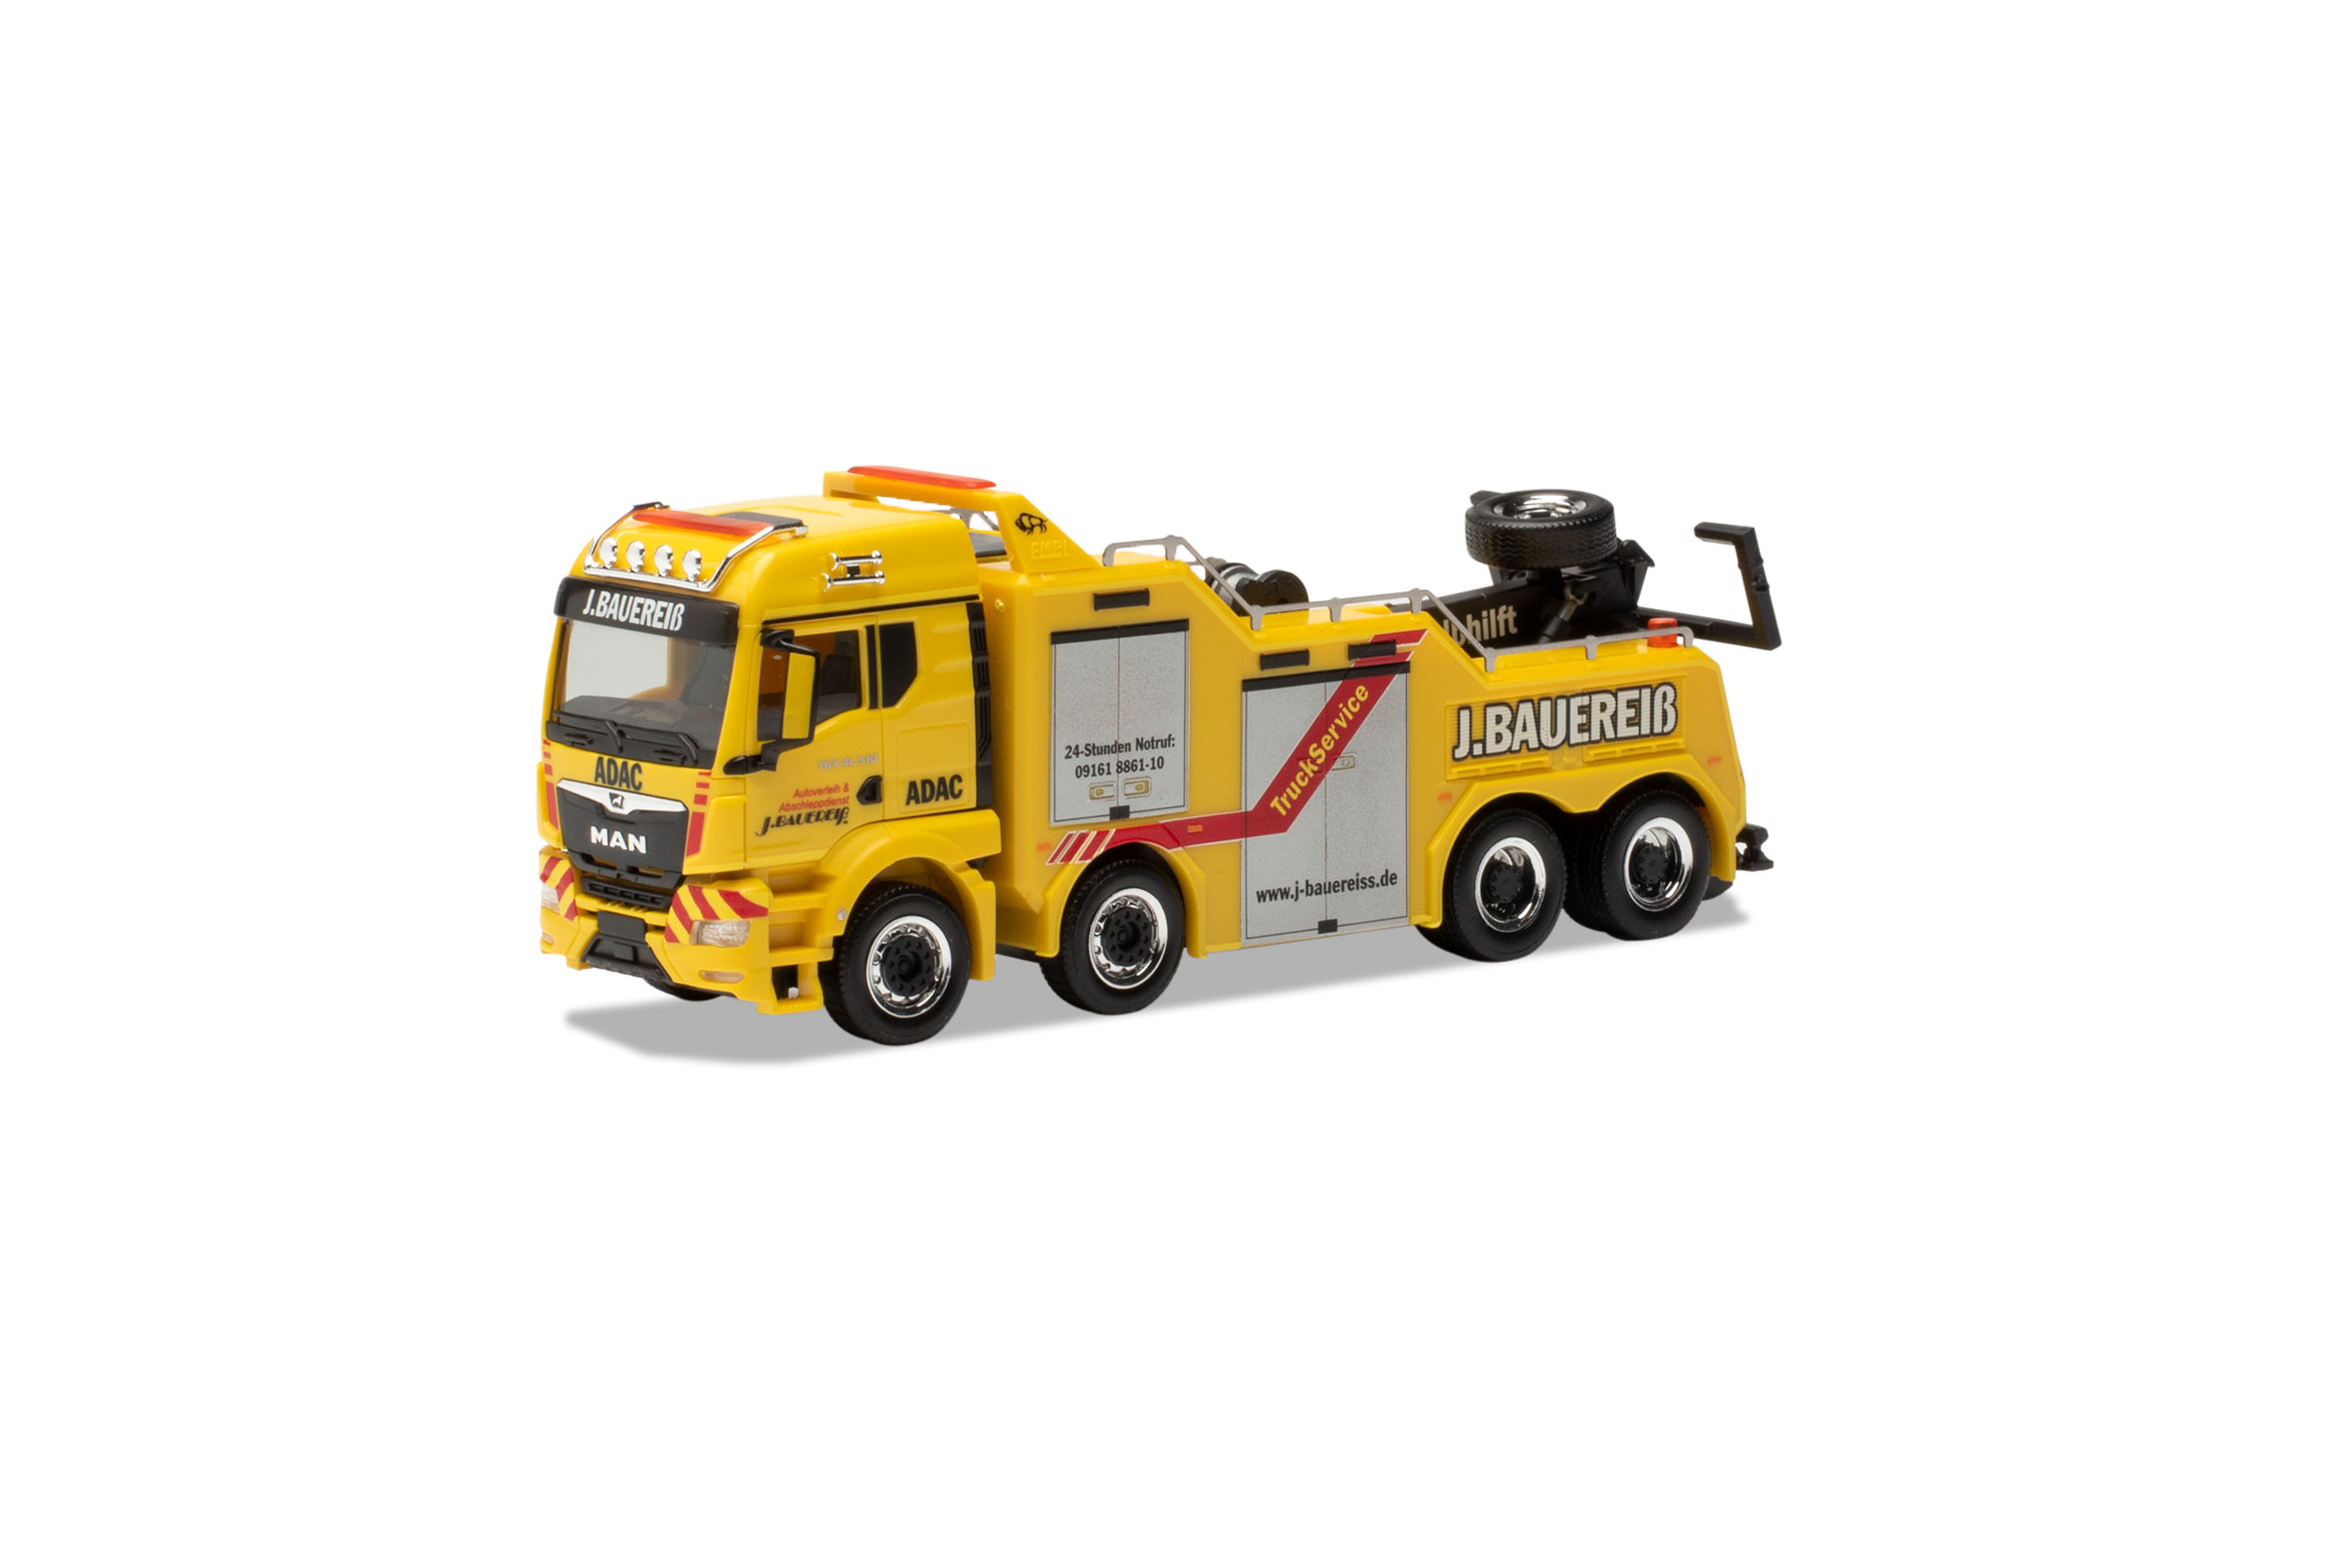 MAN TGS TM 41.510 recovery vehicle